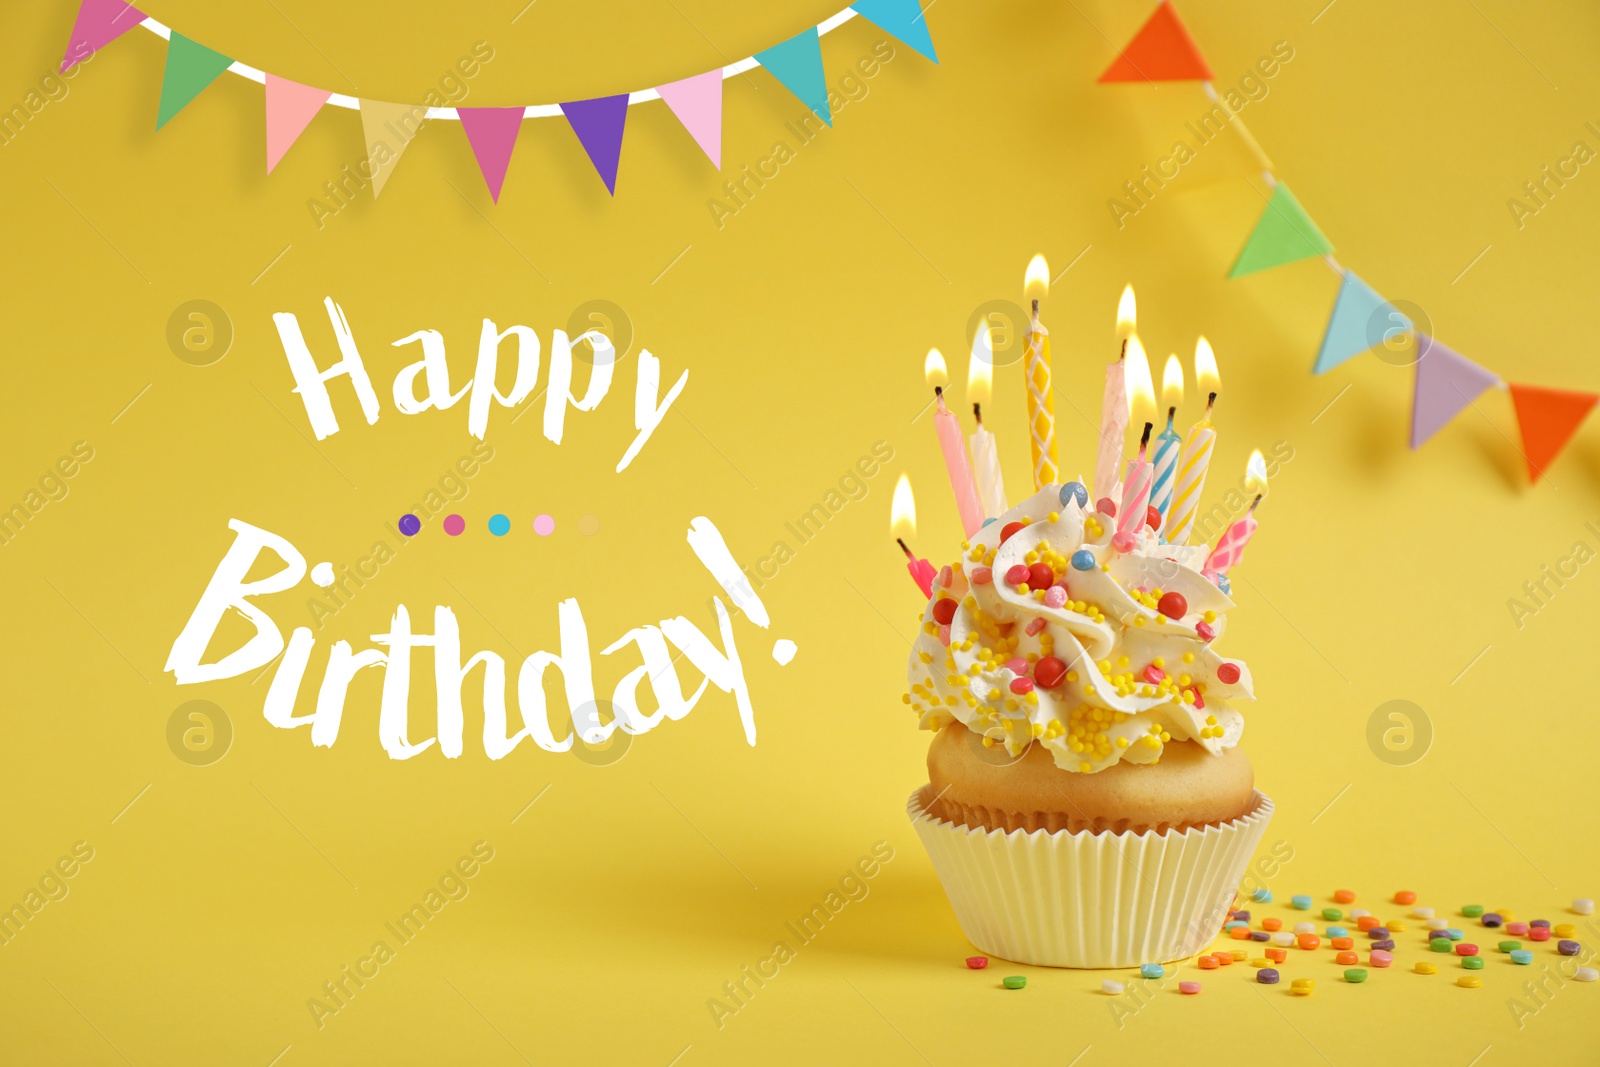 Image of Happy Birthday! Delicious cupcake with candles on yellow background